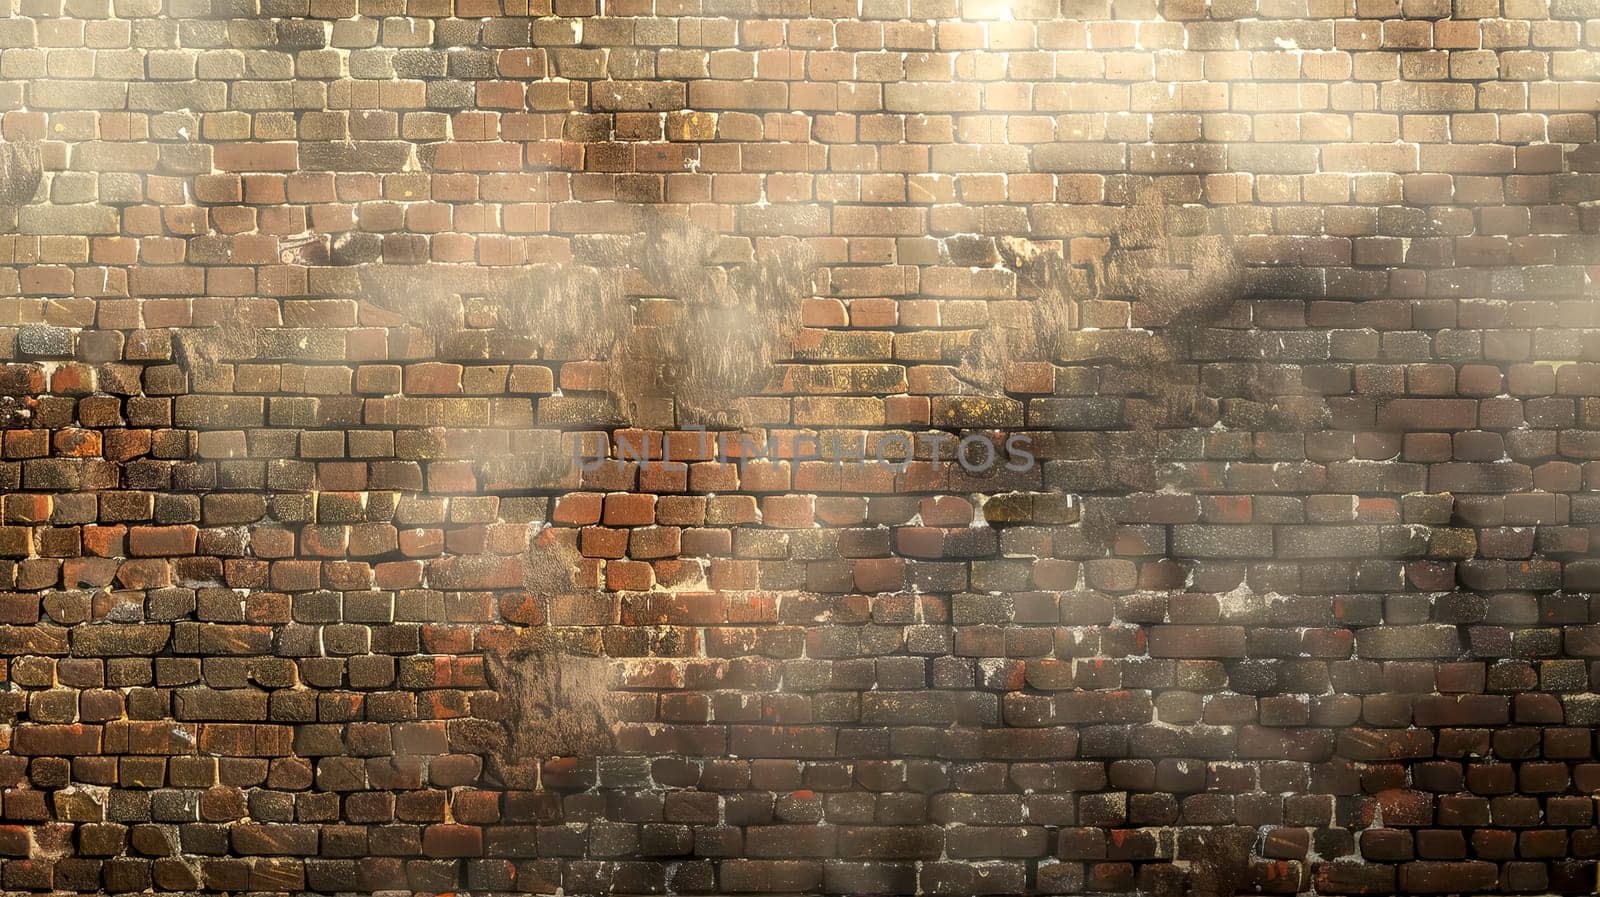 Vintage brick wall texture with light beam by Edophoto